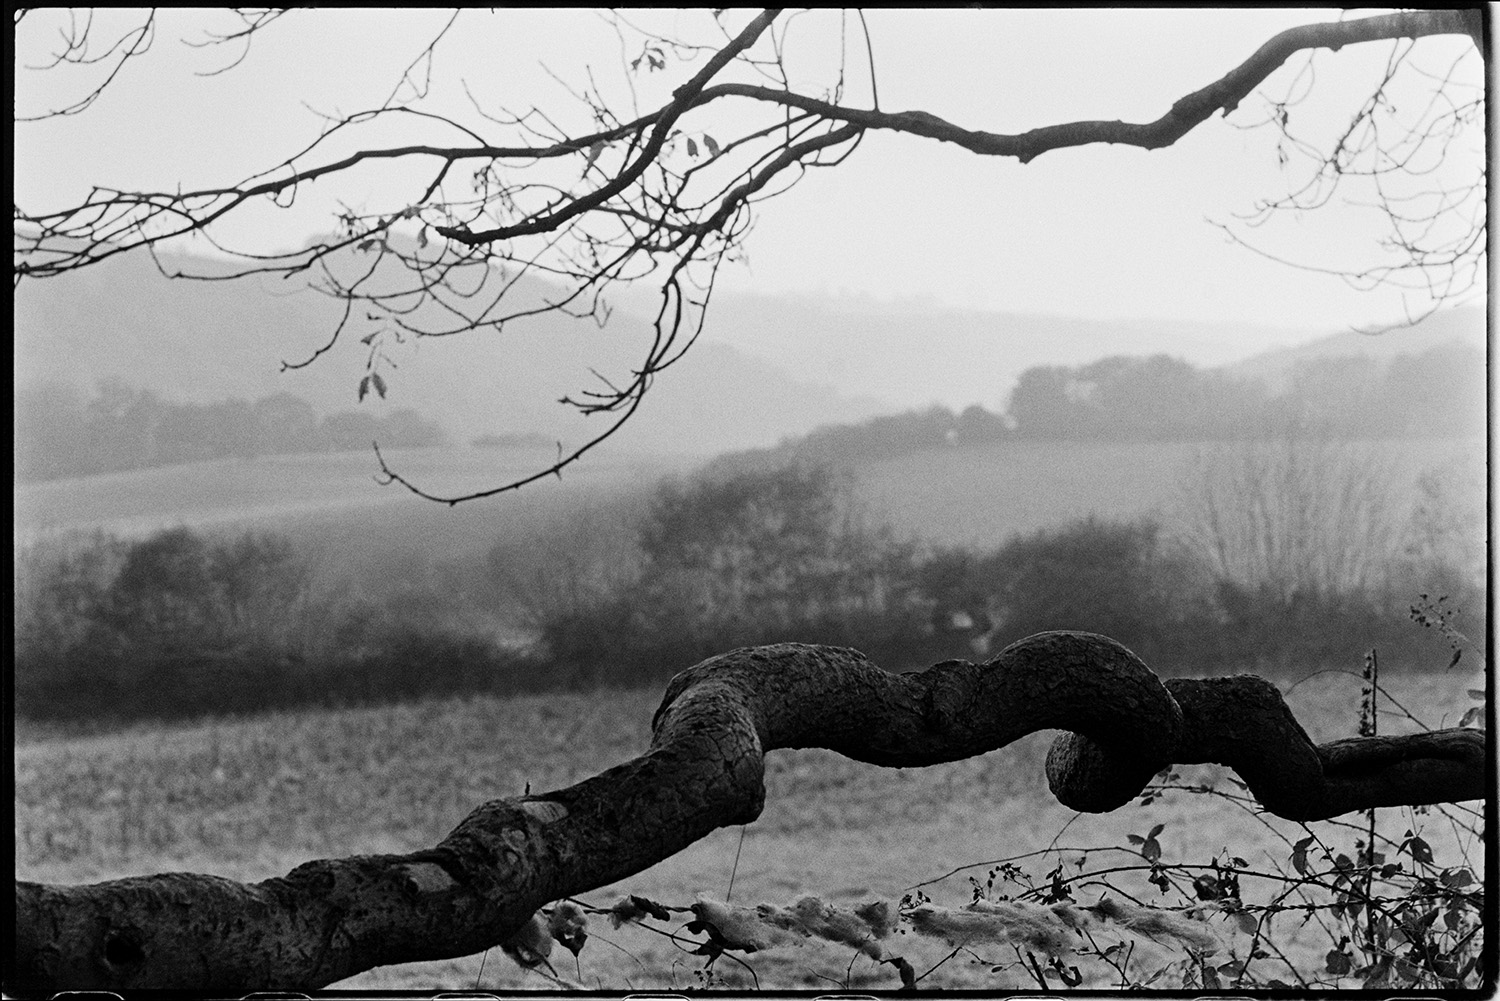 Really boring landscape, trying out new old lens. 
[A landscape of fields, trees and hedgerows near Chulmleigh. A tree branch is in the foreground. This image was taken by James Ravilious to try a new lens.]